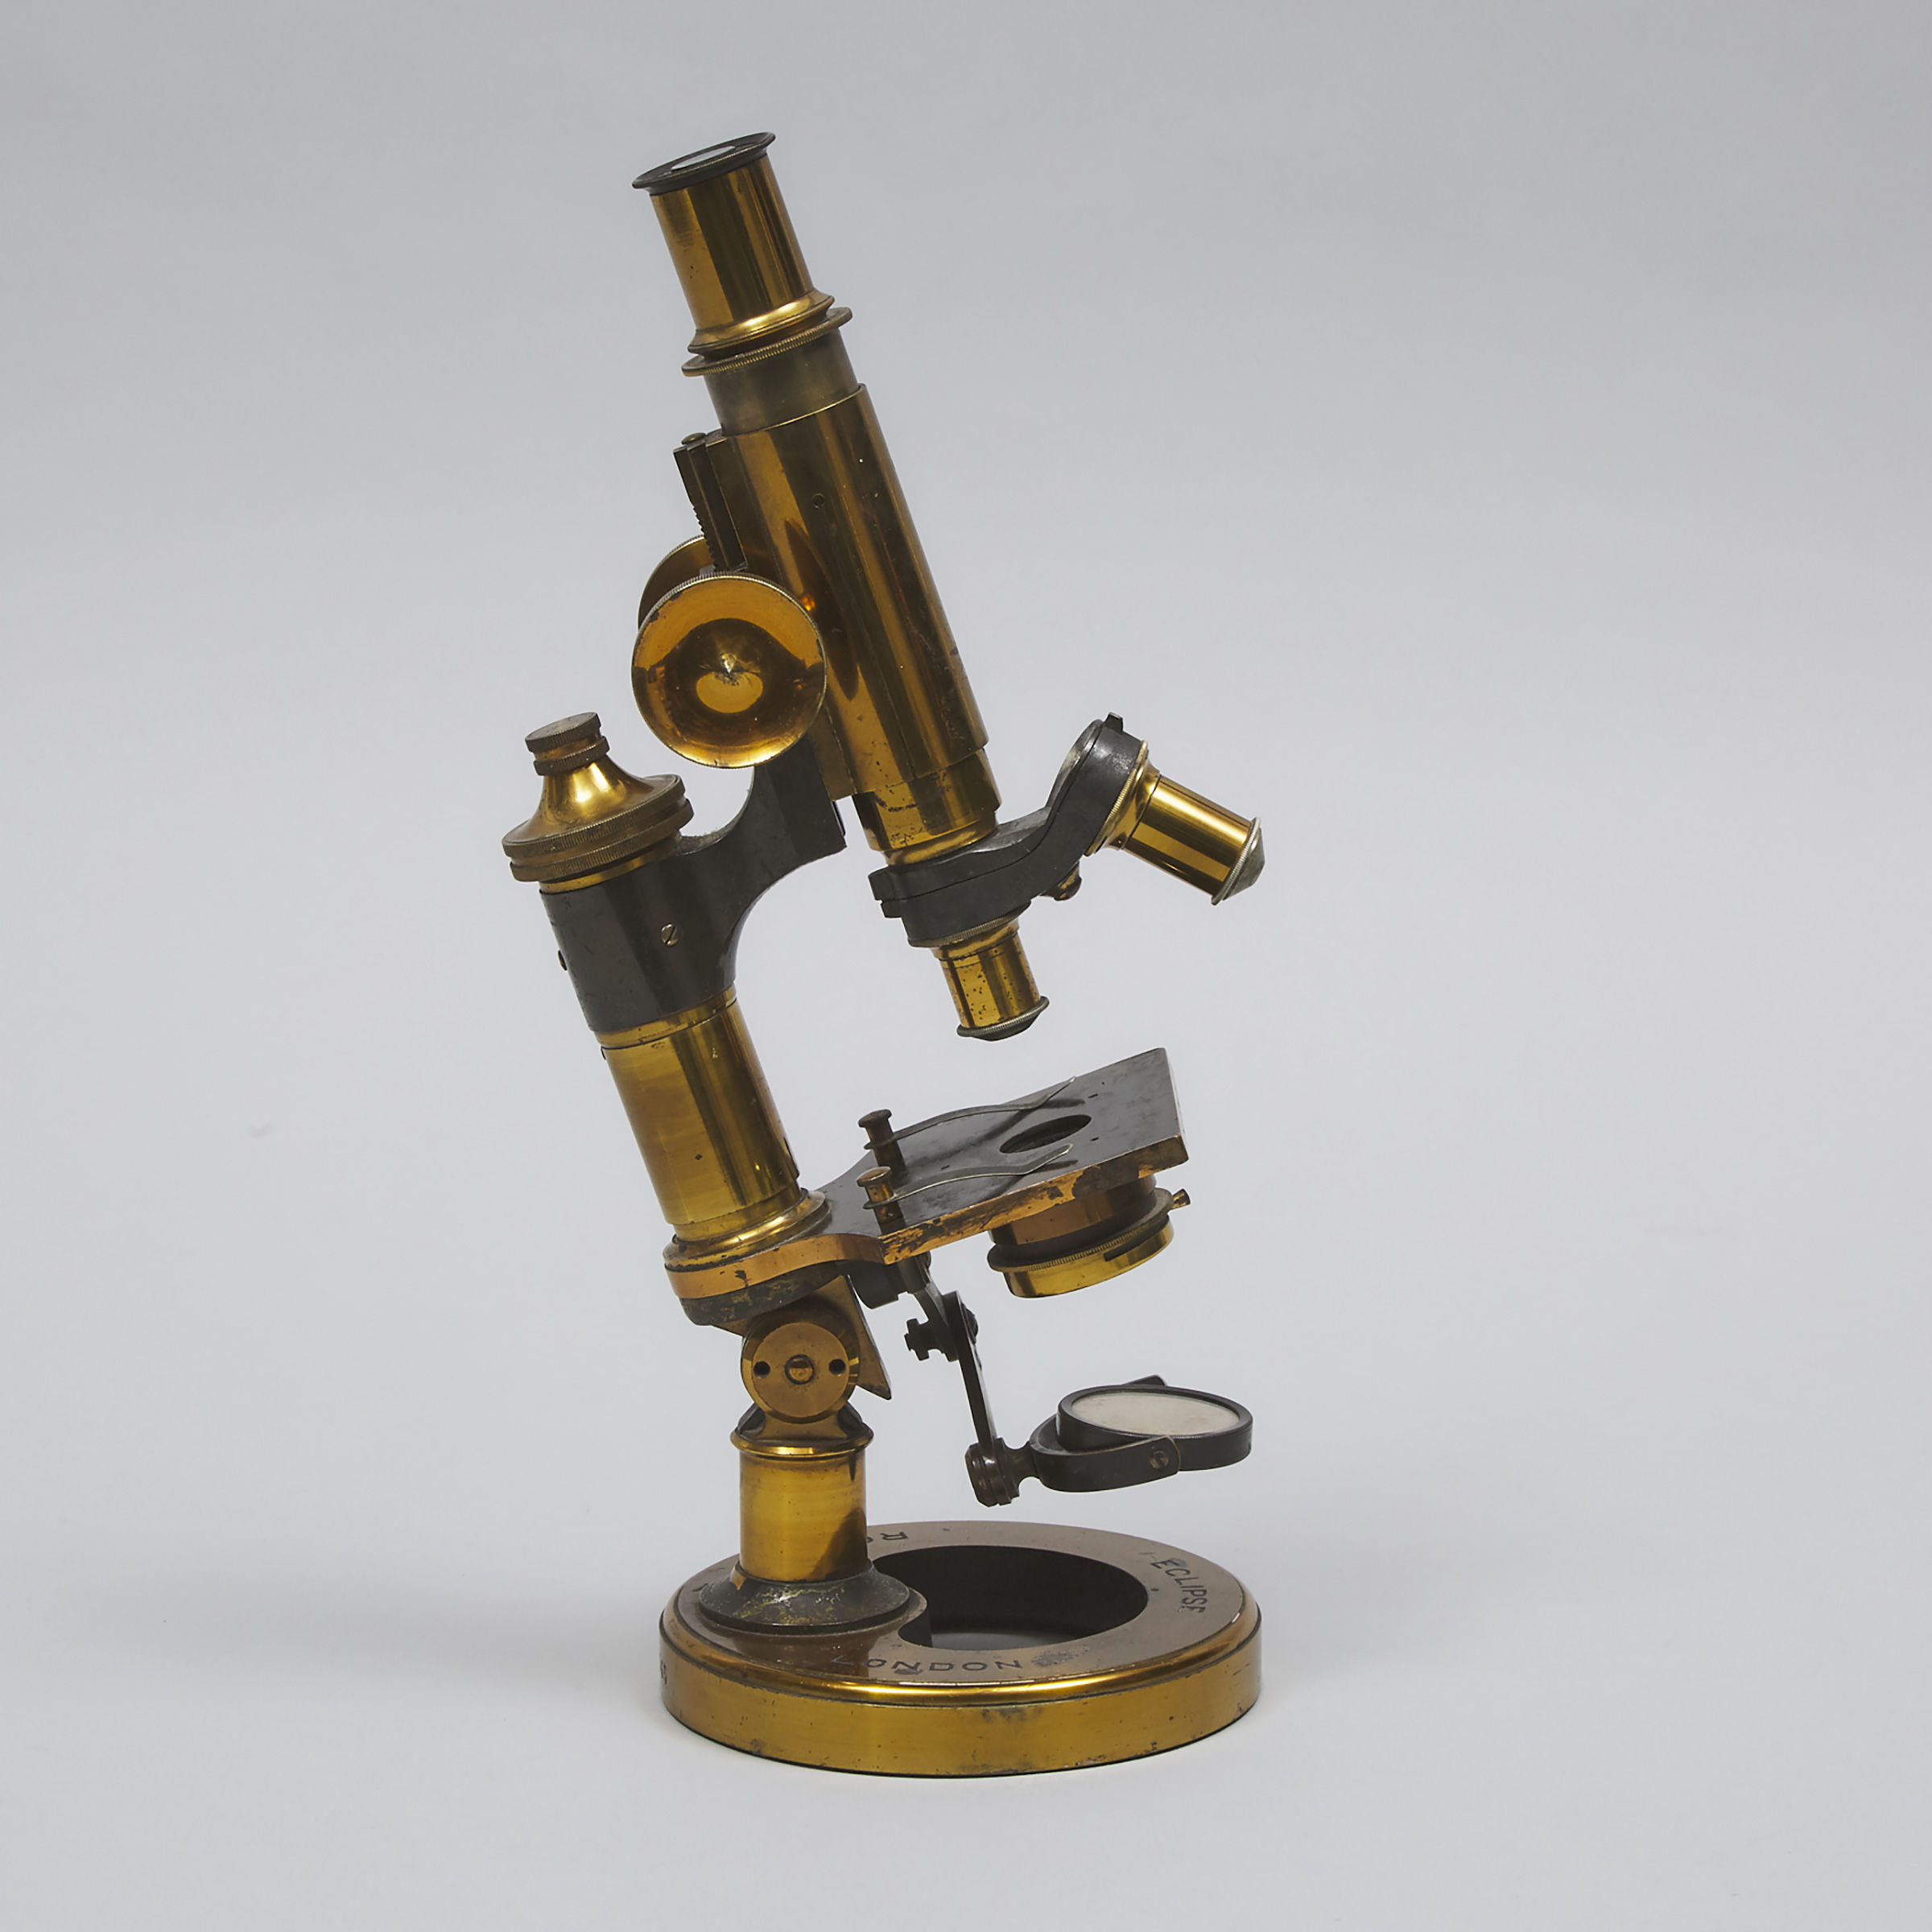 Ross & Co., 'Eclipse' Lacquered Brass Compound Monocular Microscope, London, c.1895